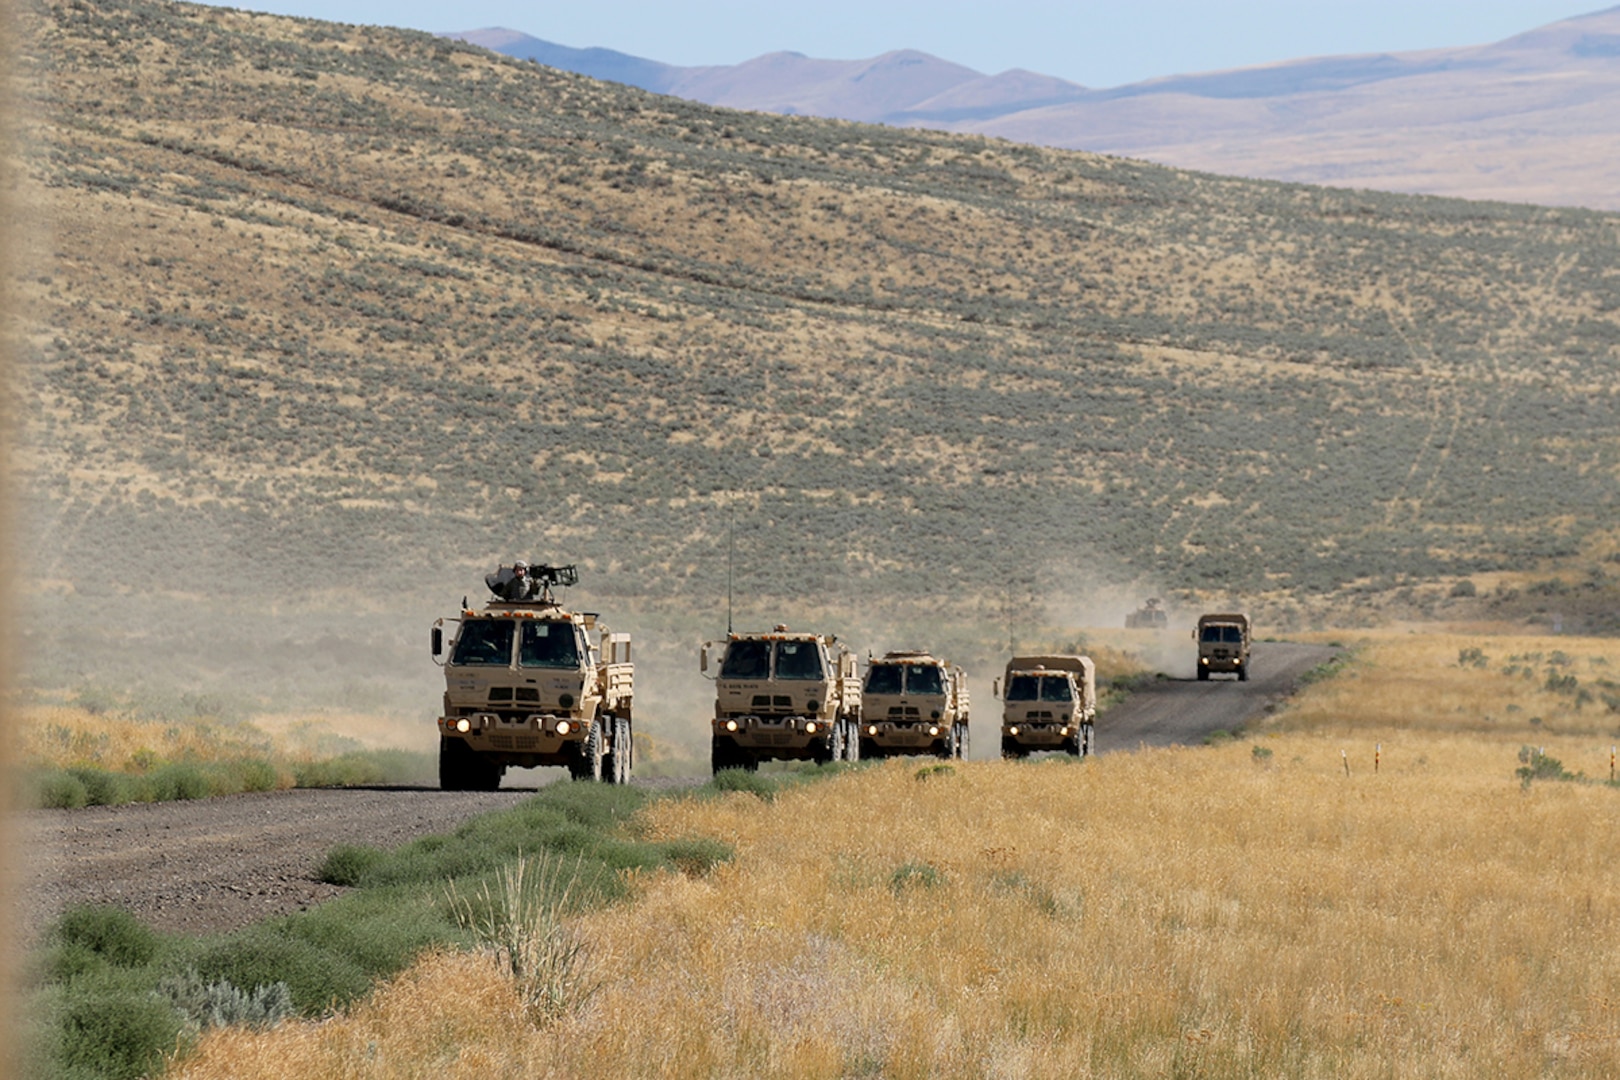 Illinois Army National Guard Soldiers from the 1844th Transportation Company convoy to their IED lane training as part of Rising Thunder 2019